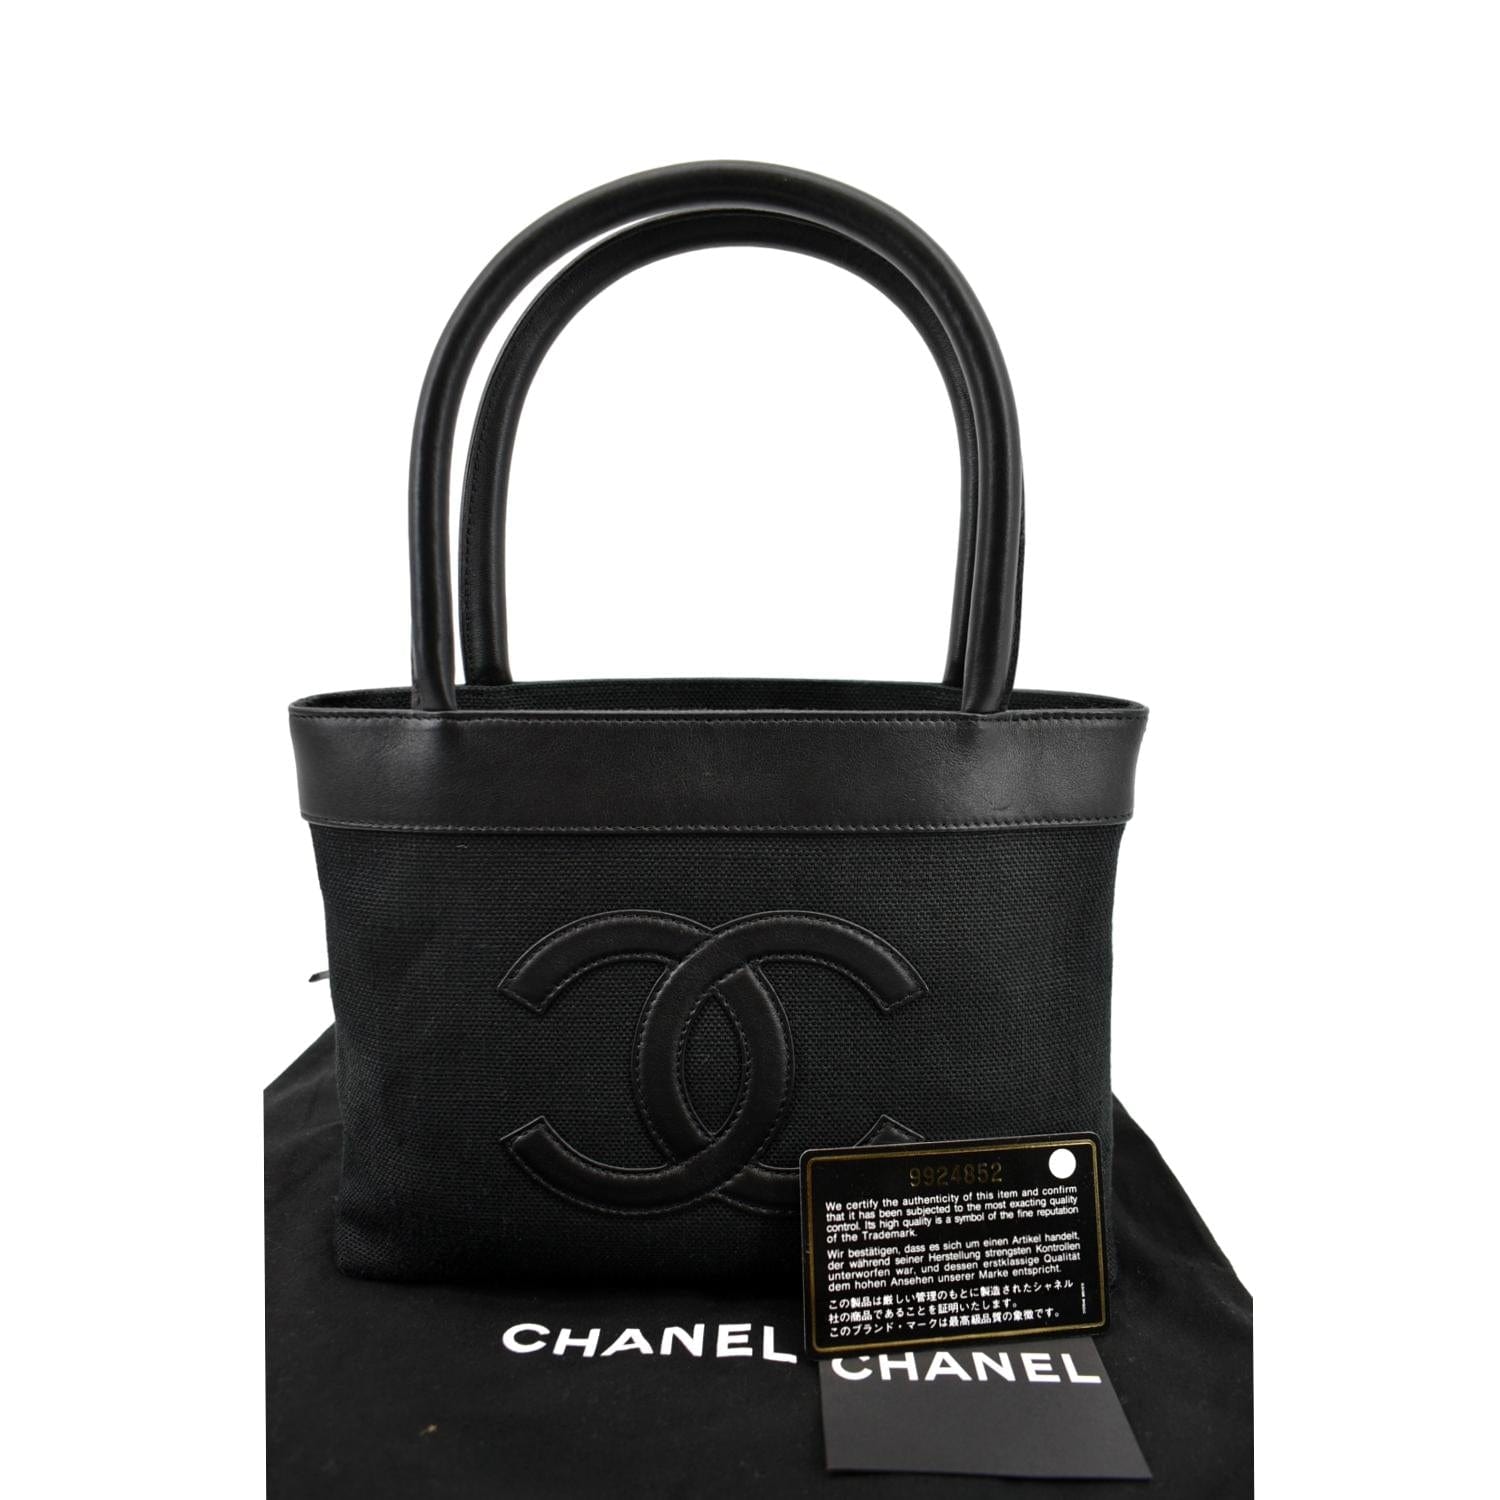 Black Friday - Women's Chanel Business Bags gifts: up to −20%